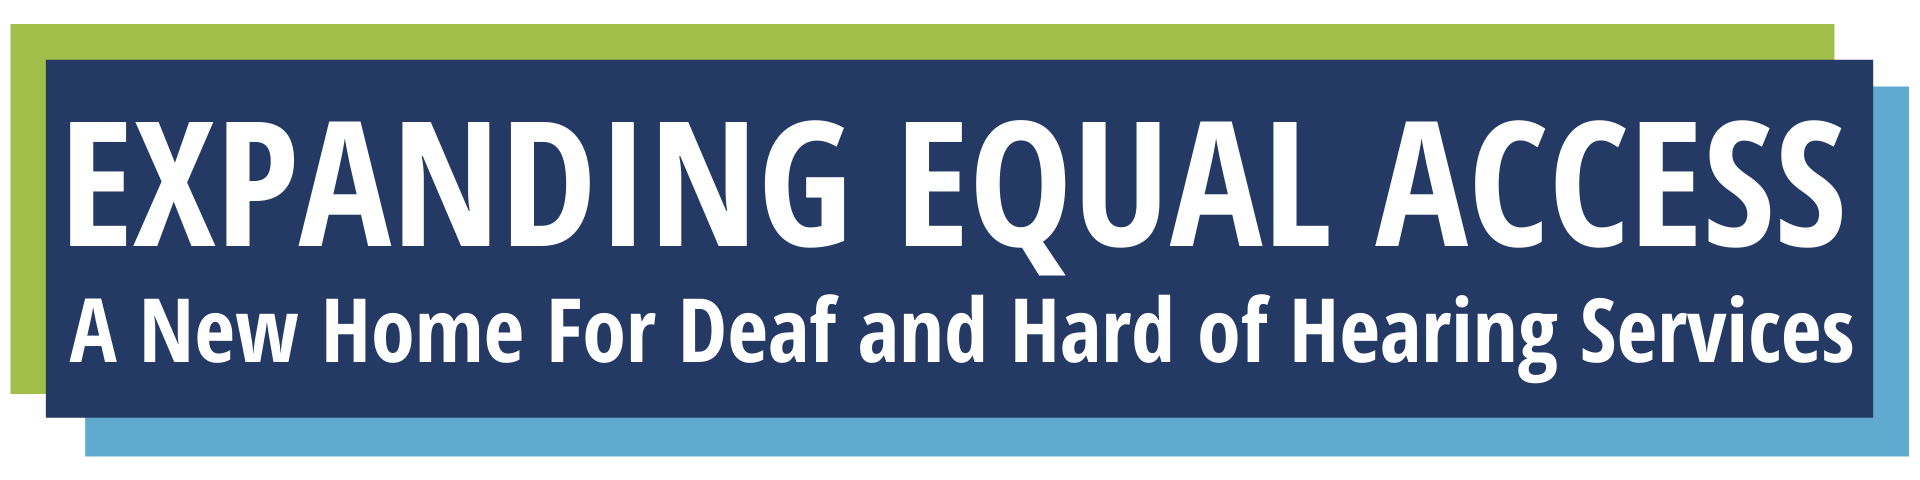 Image Header: Expanding Equal Access: A New Home For Deaf and hard of Hearing Services